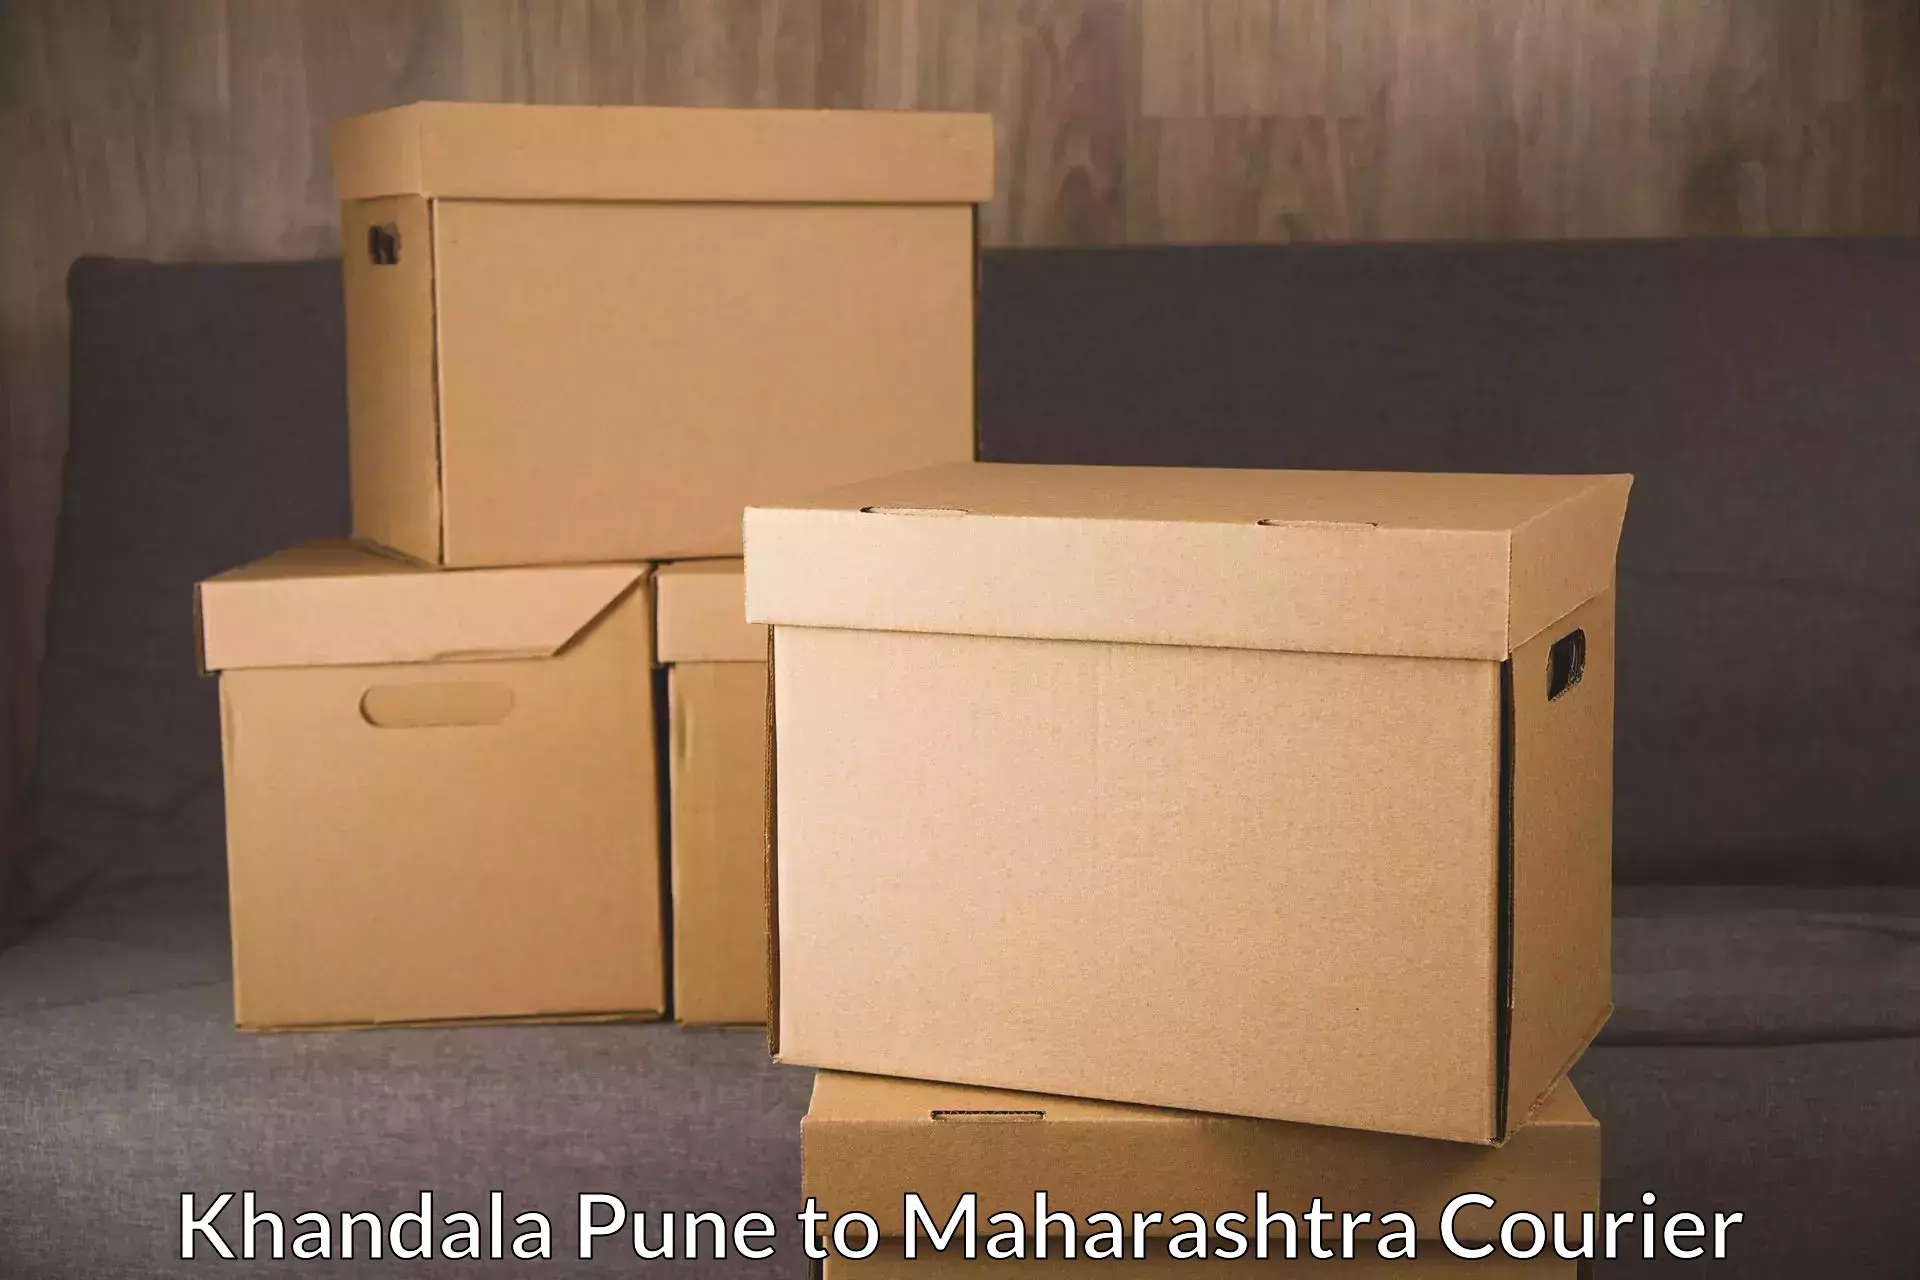 Express delivery solutions Khandala Pune to Fardapur